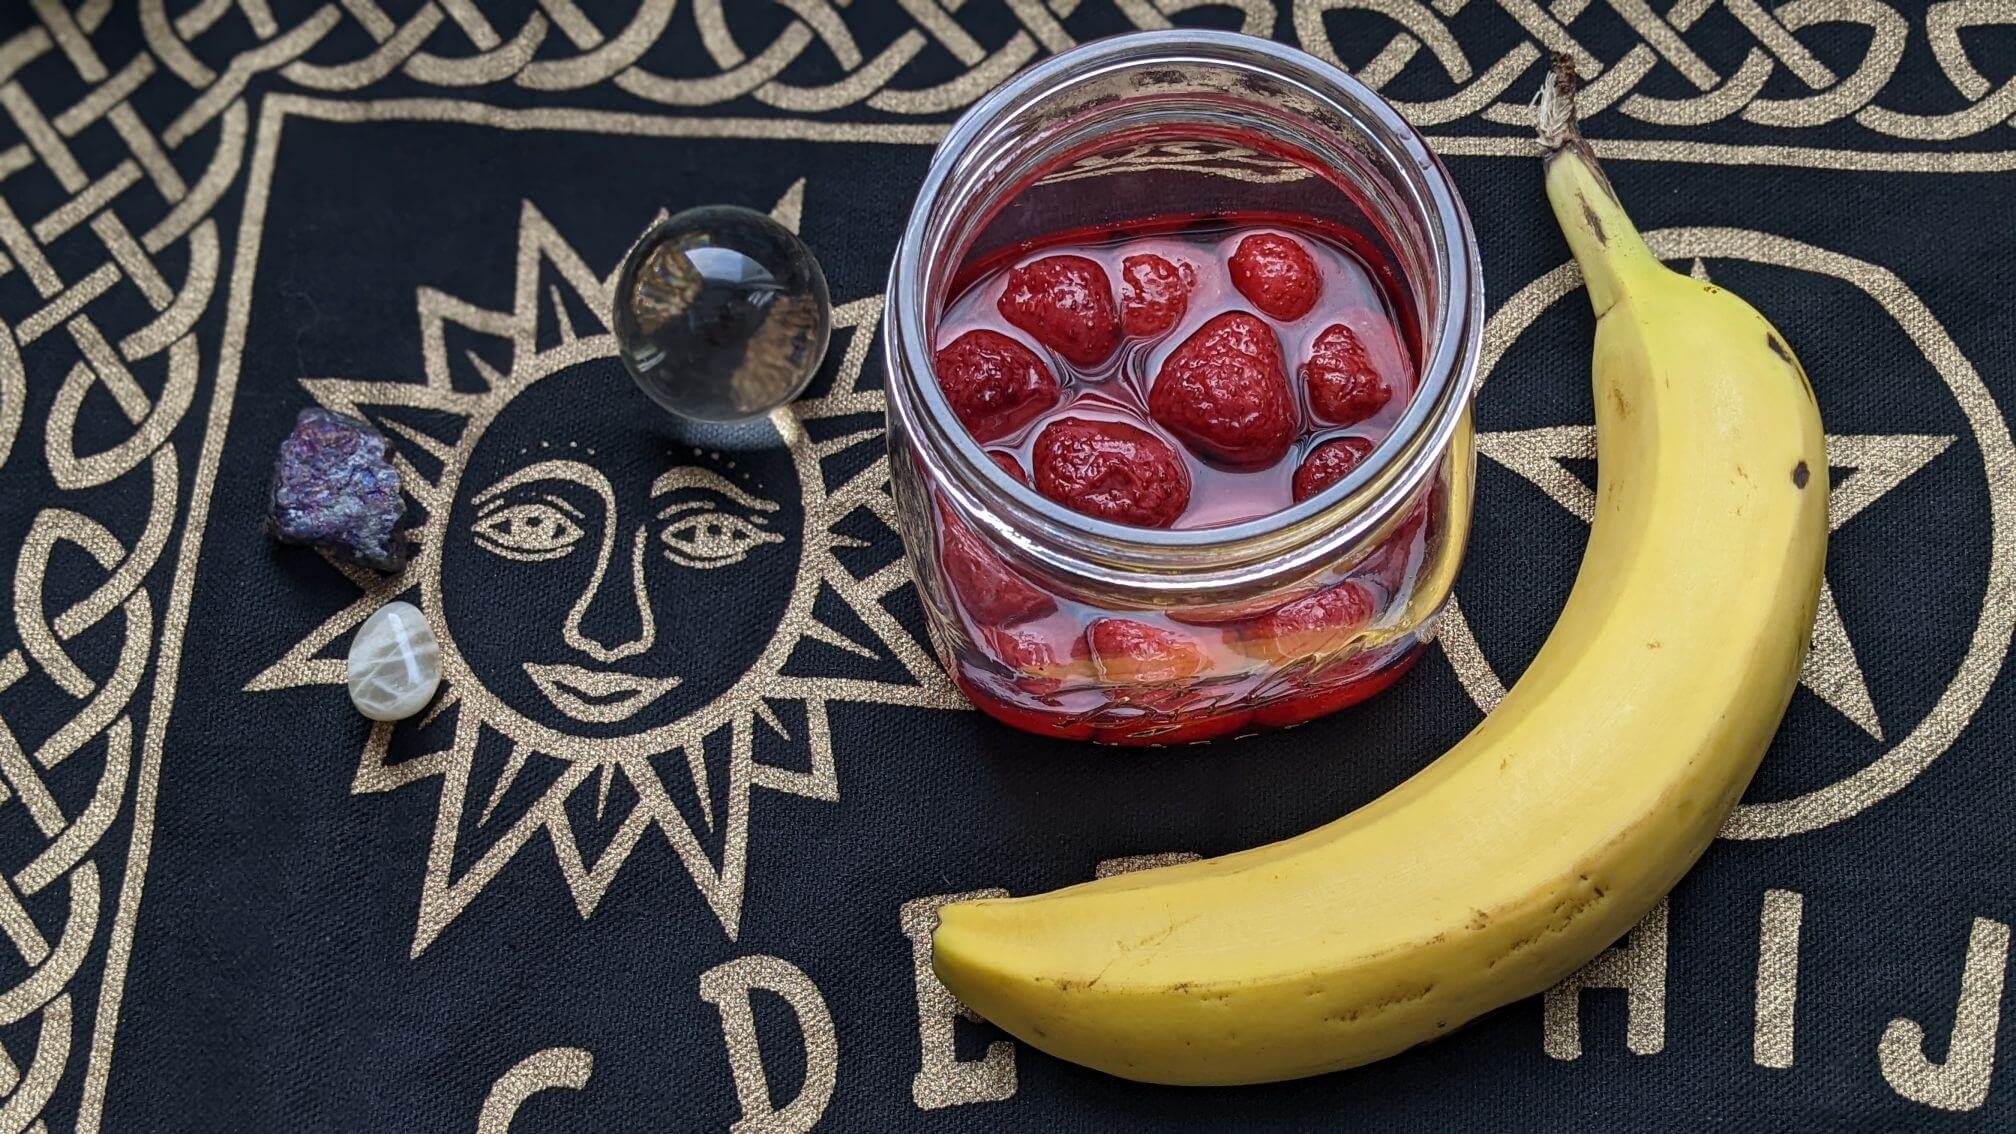 Strawberries sit in their own juice in a glass jar on a table with a Ouija Board cloth. A full, fresh banana and a few gems are also on the cloth.